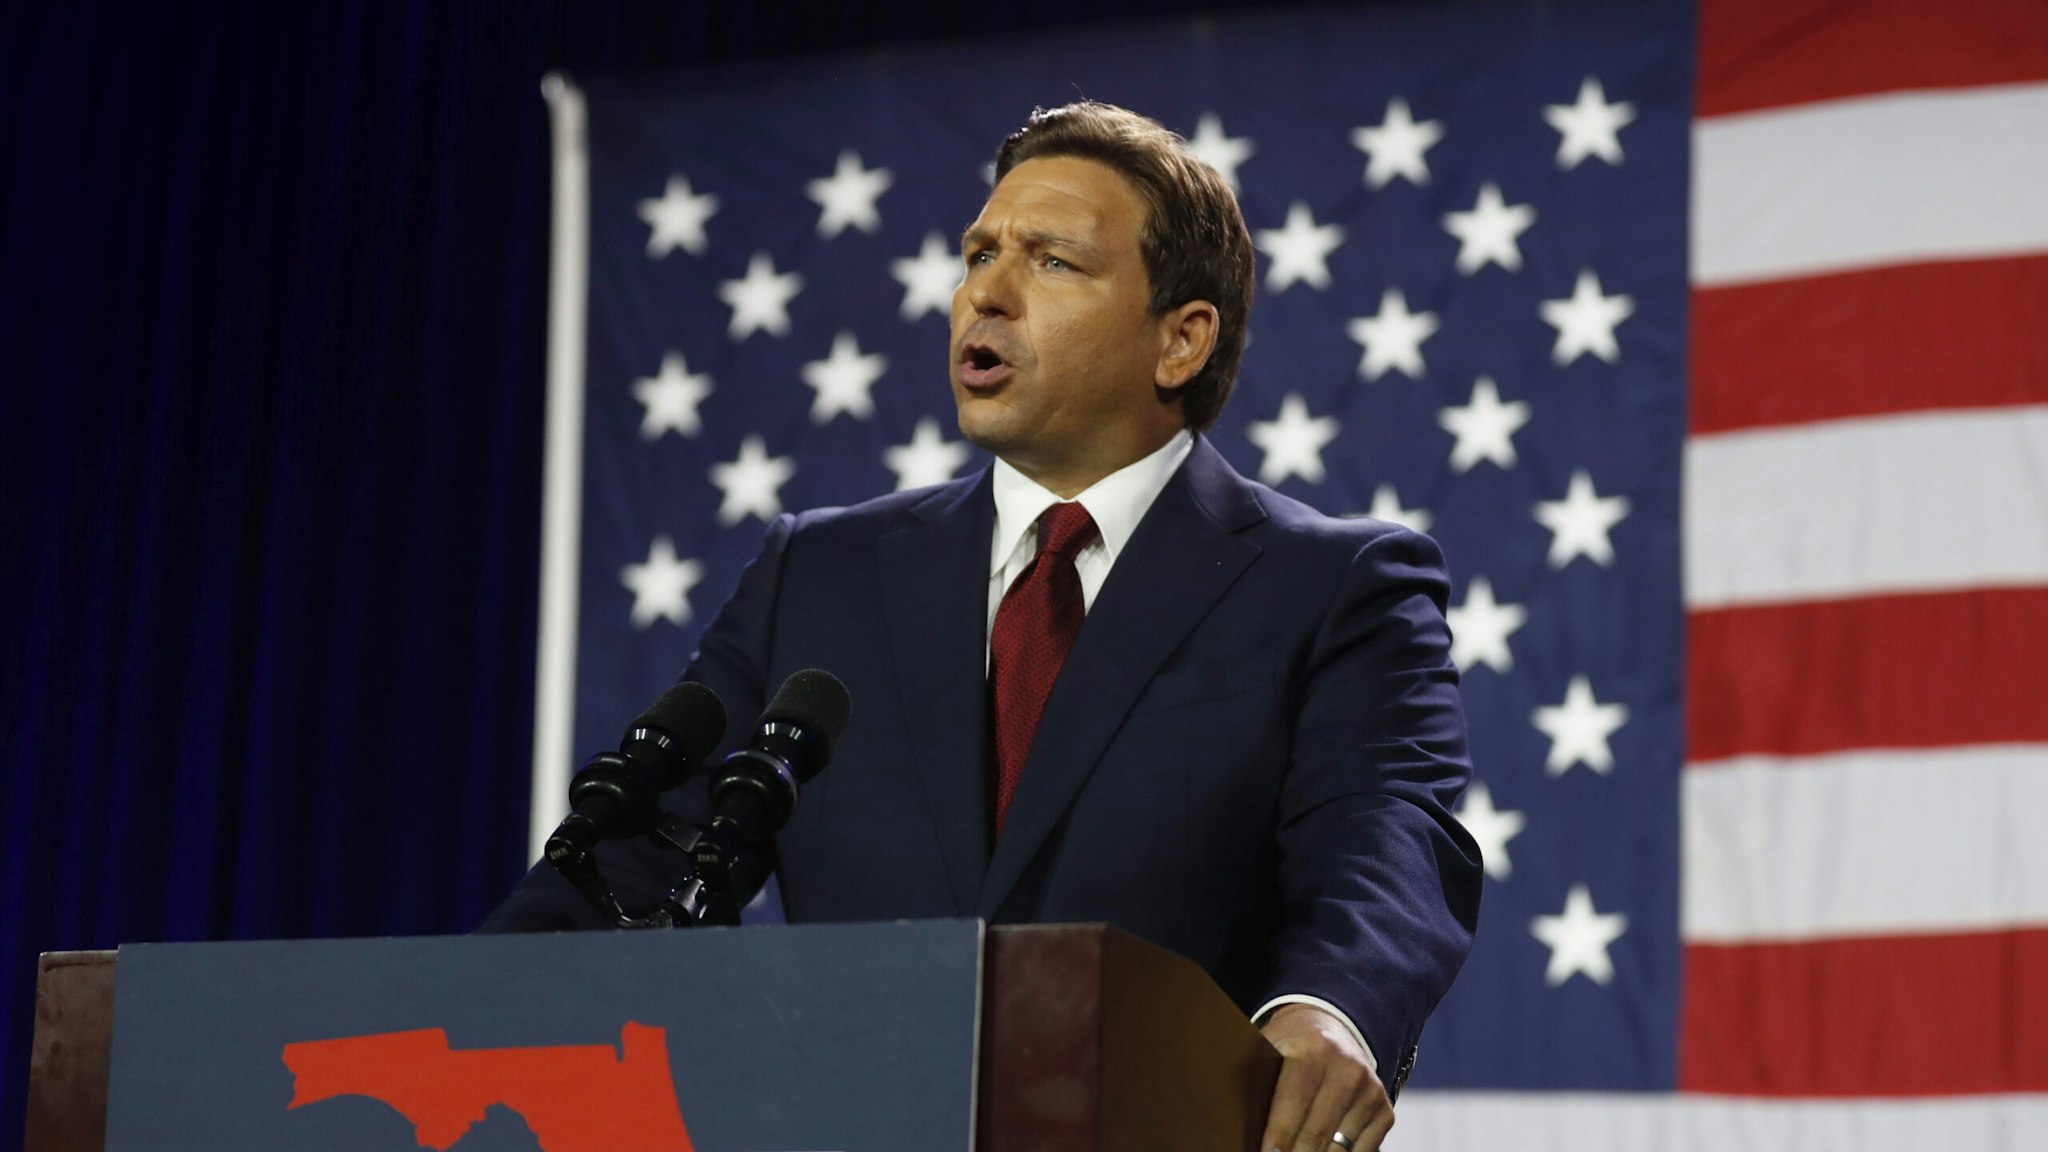 Florida Gov. Ron DeSantis gives a victory speech after defeating Democratic gubernatorial candidate Rep. Charlie Crist during his election night watch party at the Tampa Convention Center on November 8, 2022 in Tampa, Florida. DeSantis was the projected winner by a double-digit lead.